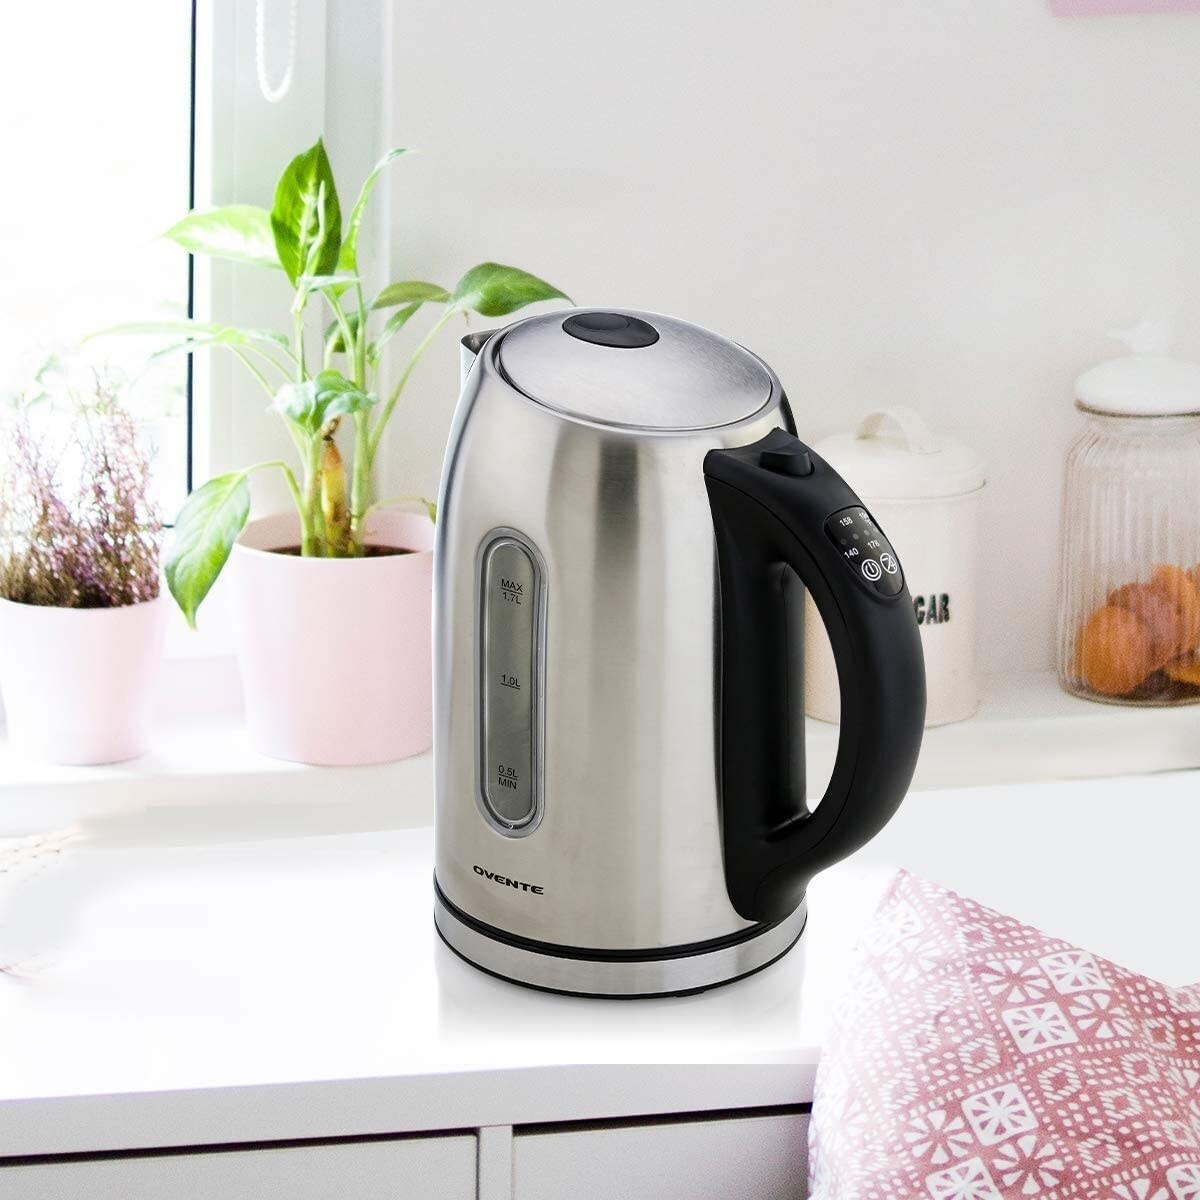 https://ak1.ostkcdn.com/images/products/is/images/direct/eb432bebe3a24672300fec2842a56762f34fc766/Ovente-Electric-Stainless-Steel-Hot-Water-Kettle-1.7-Liter-with-5-Temperature-Control-%26-Concealed-Heating-Element%2C-KS89-Series.jpg